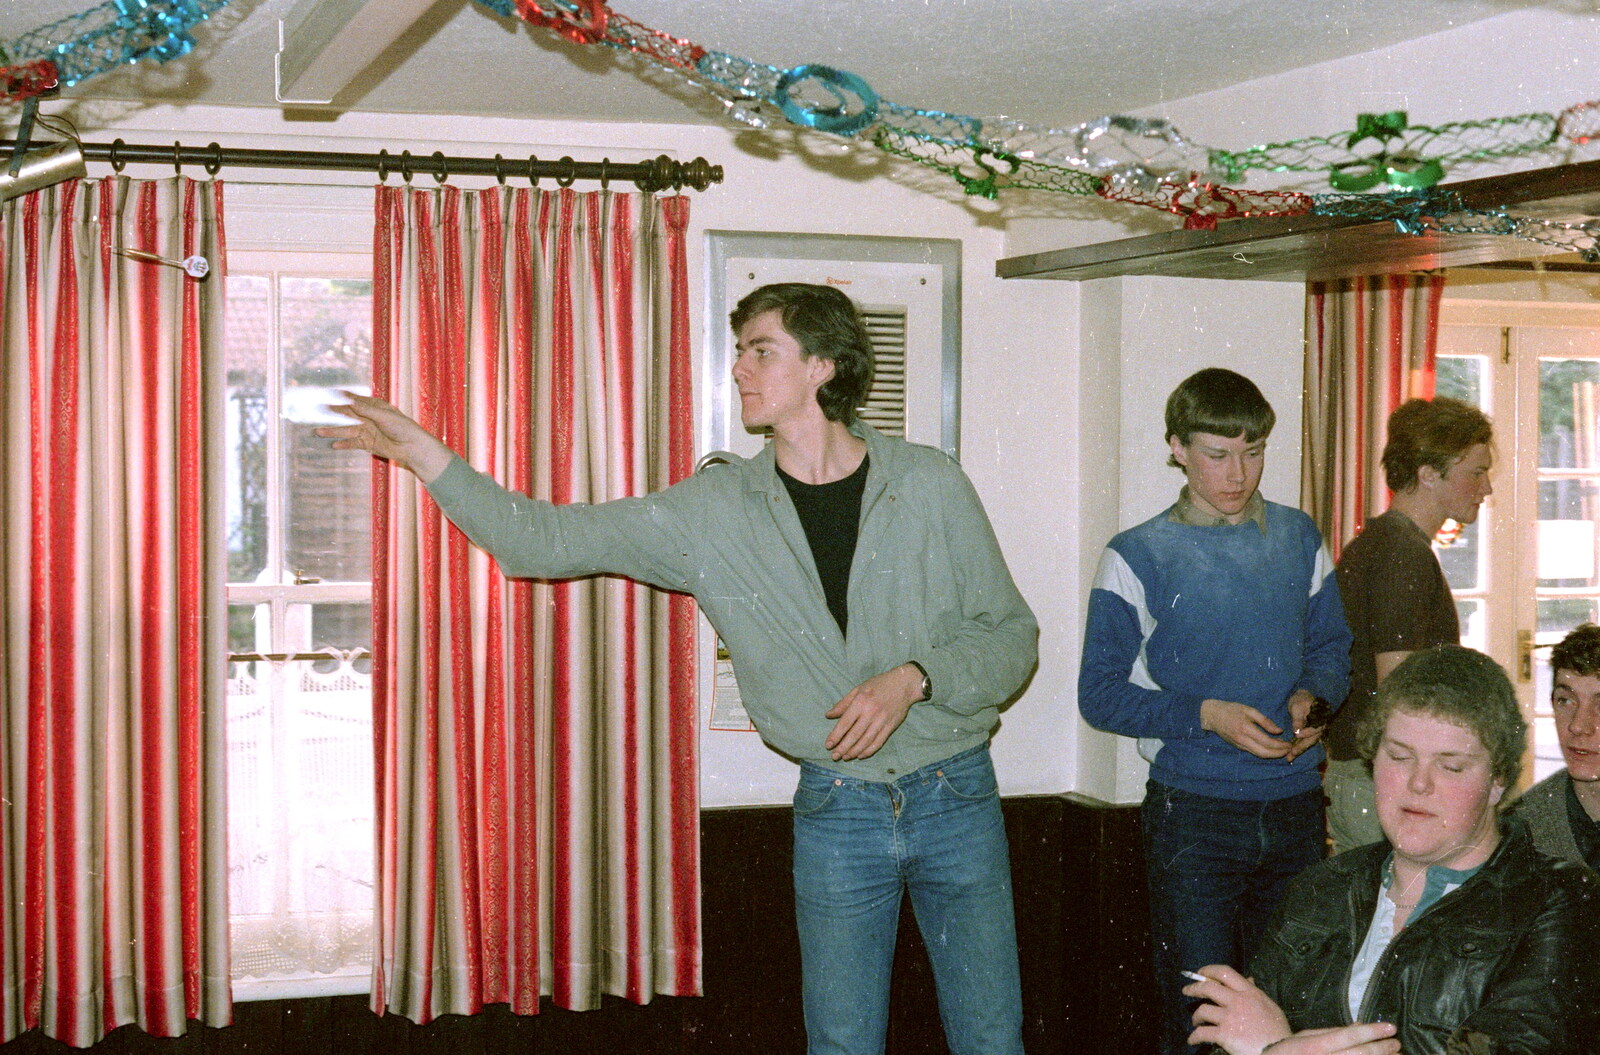 Keith Frost throws a dart in the pub from The Last Day of Term, and Leaving New Milton, Hampshire - 18th September 1985